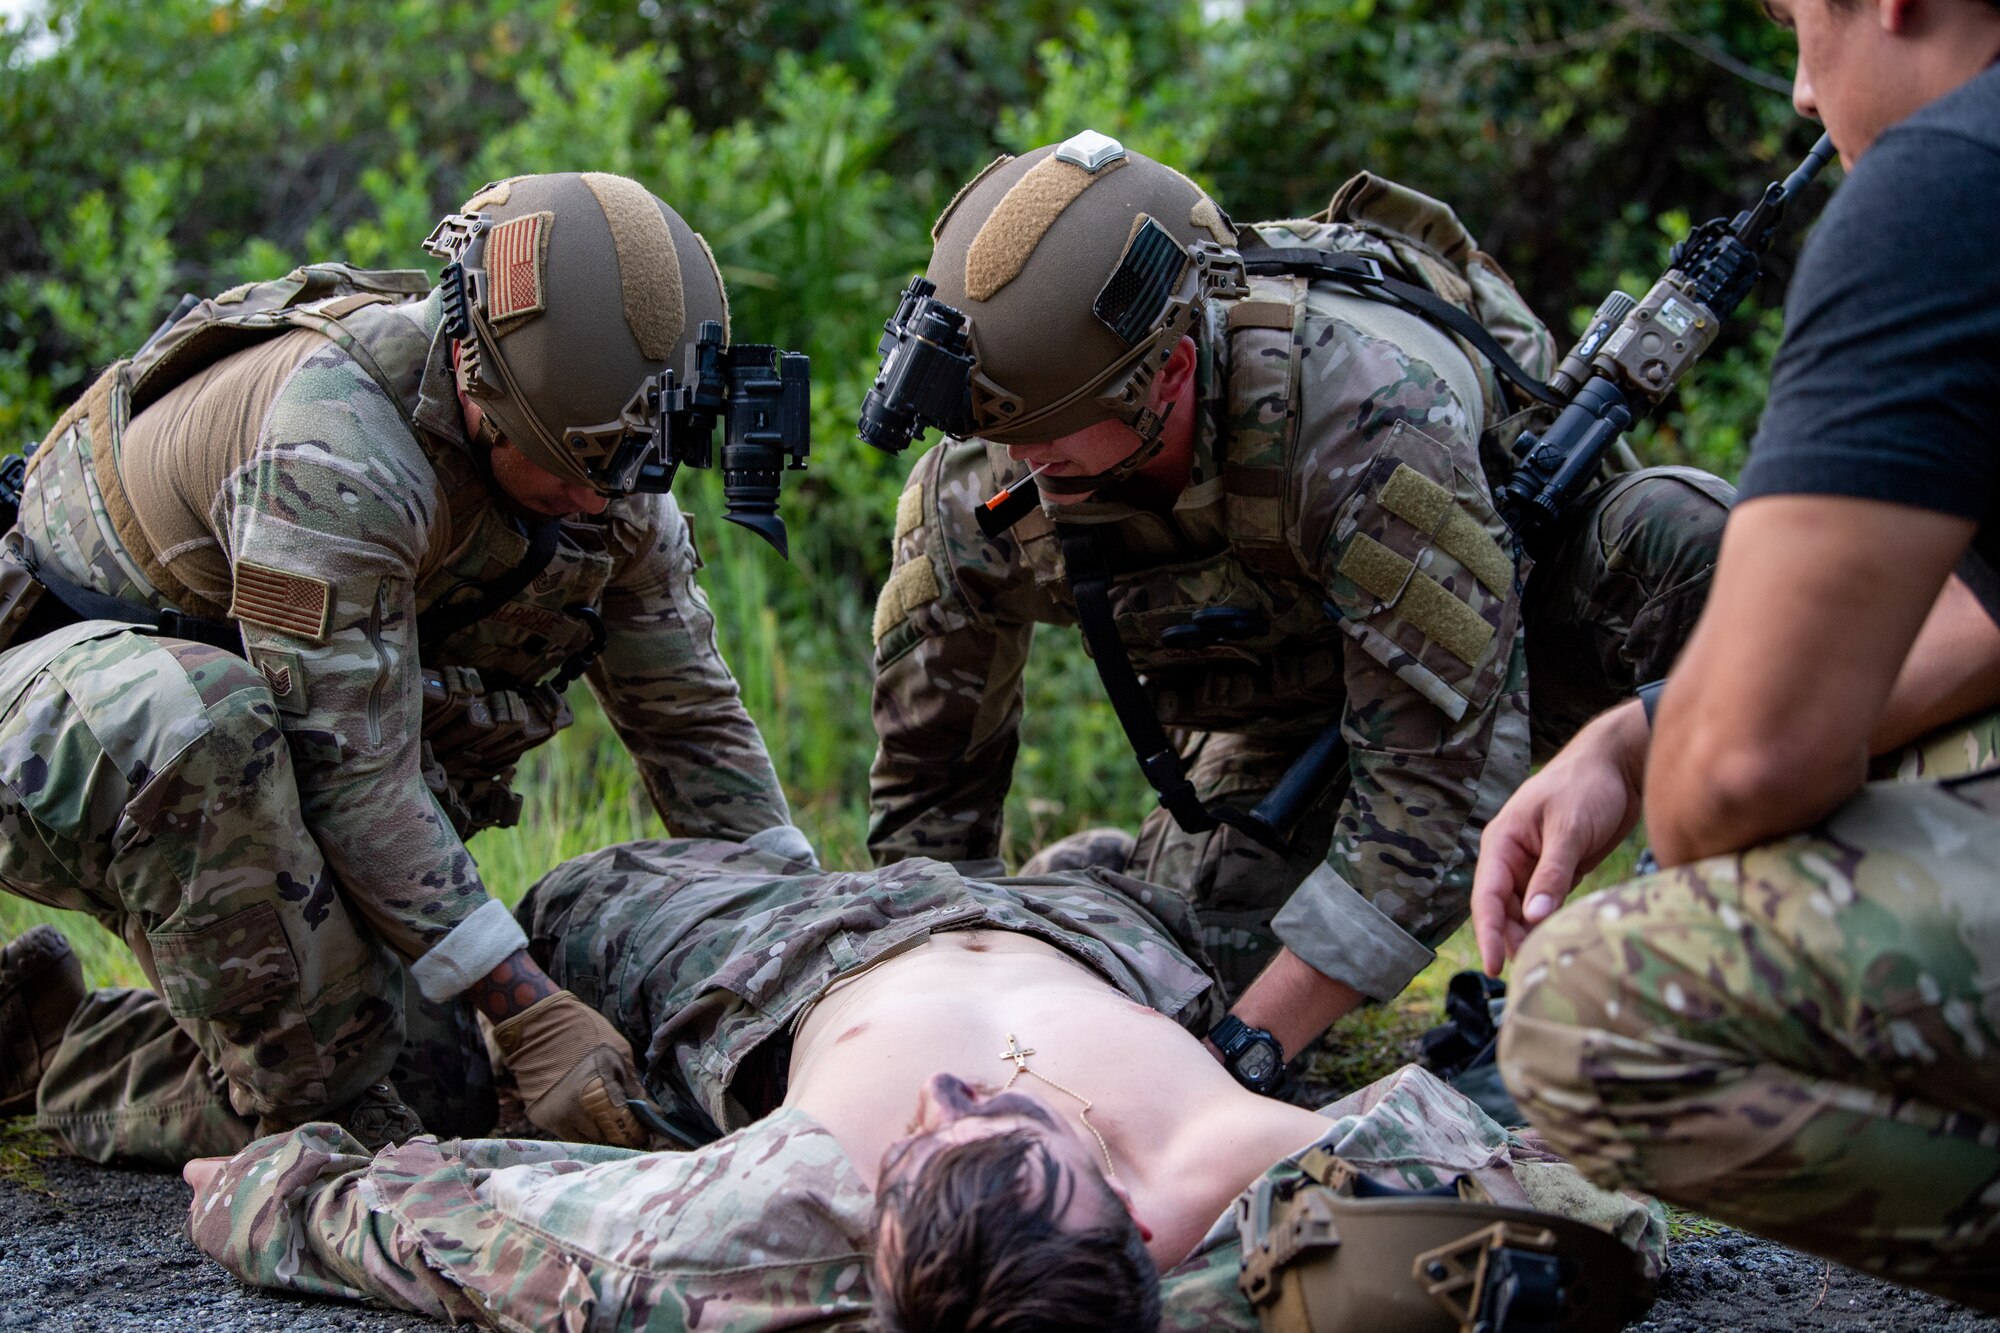 Photo of Airmen conducting medical training on another Airman laying on the ground